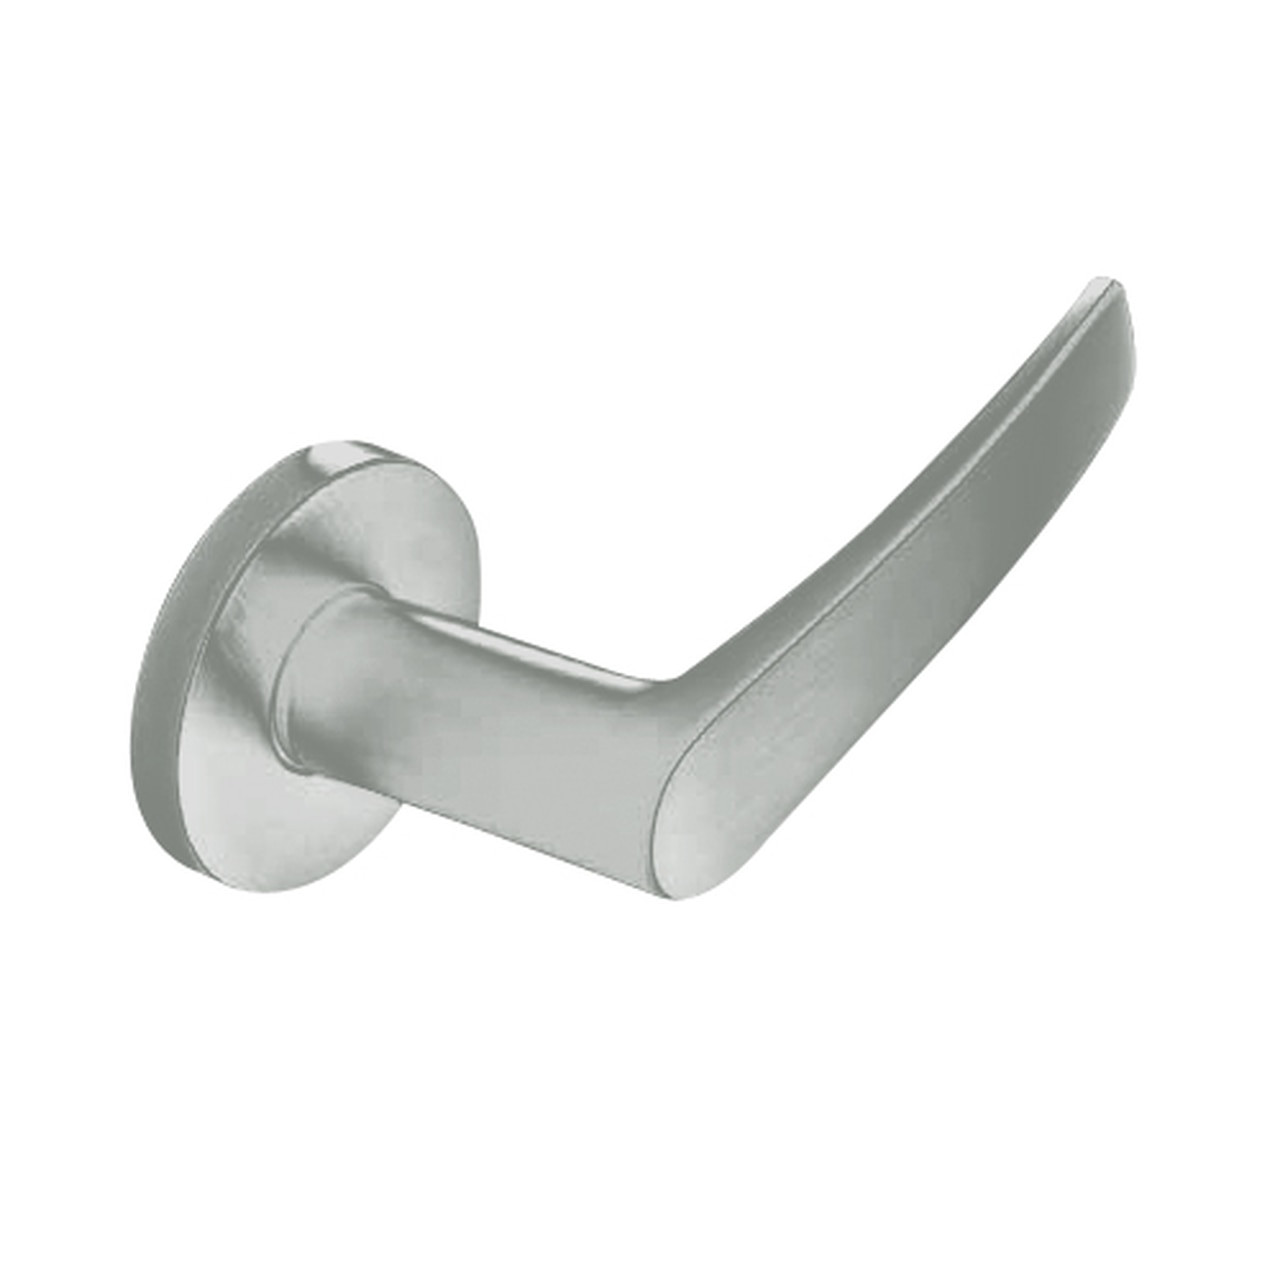 ML2053-ASA-619-CL7 Corbin Russwin ML2000 Series IC 7-Pin Less Core Mortise Entrance Locksets with Armstrong Lever in Satin Nickel